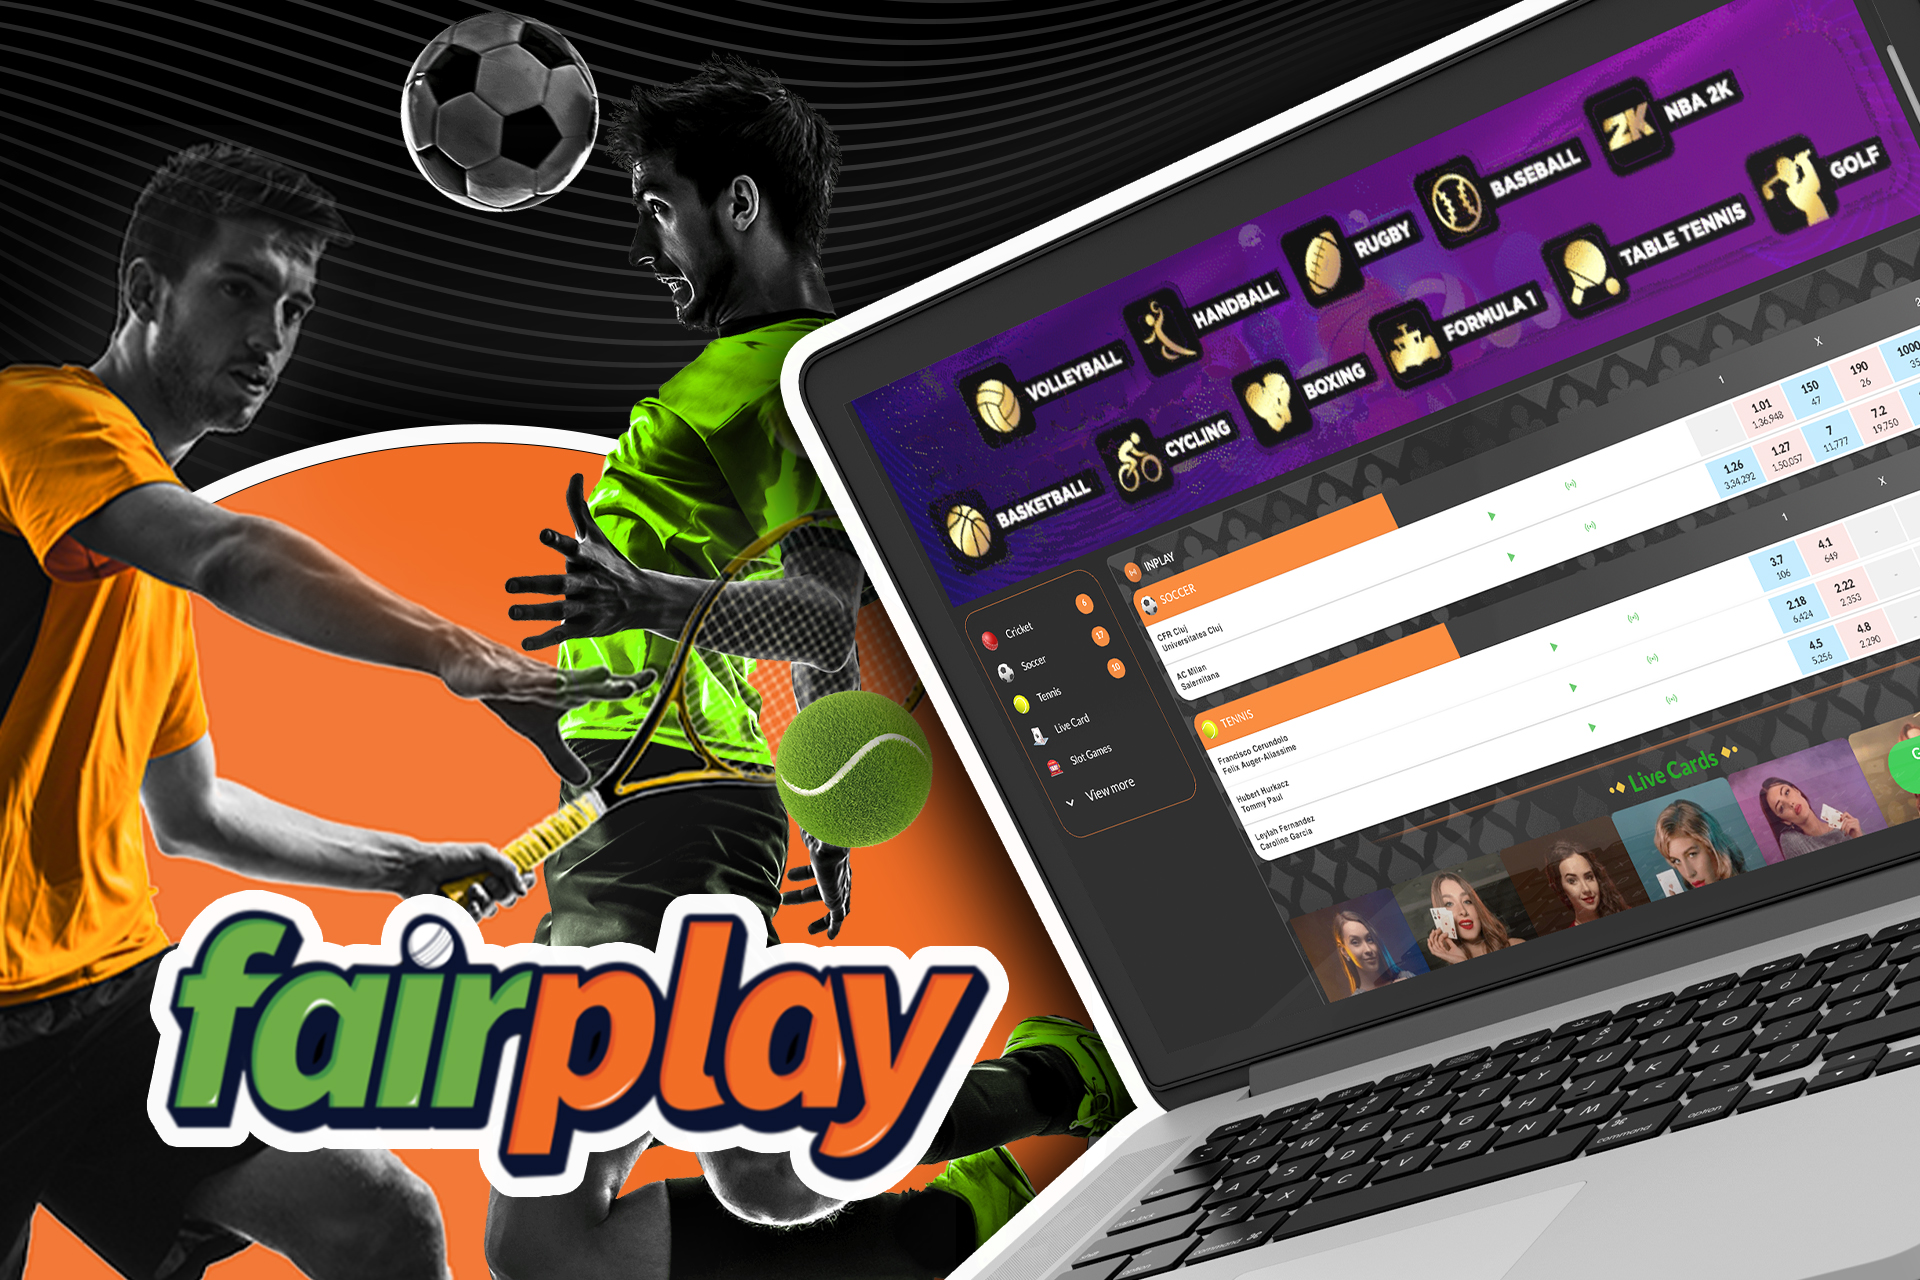 There are also many various sports that you can bet on in the Fairplay app.